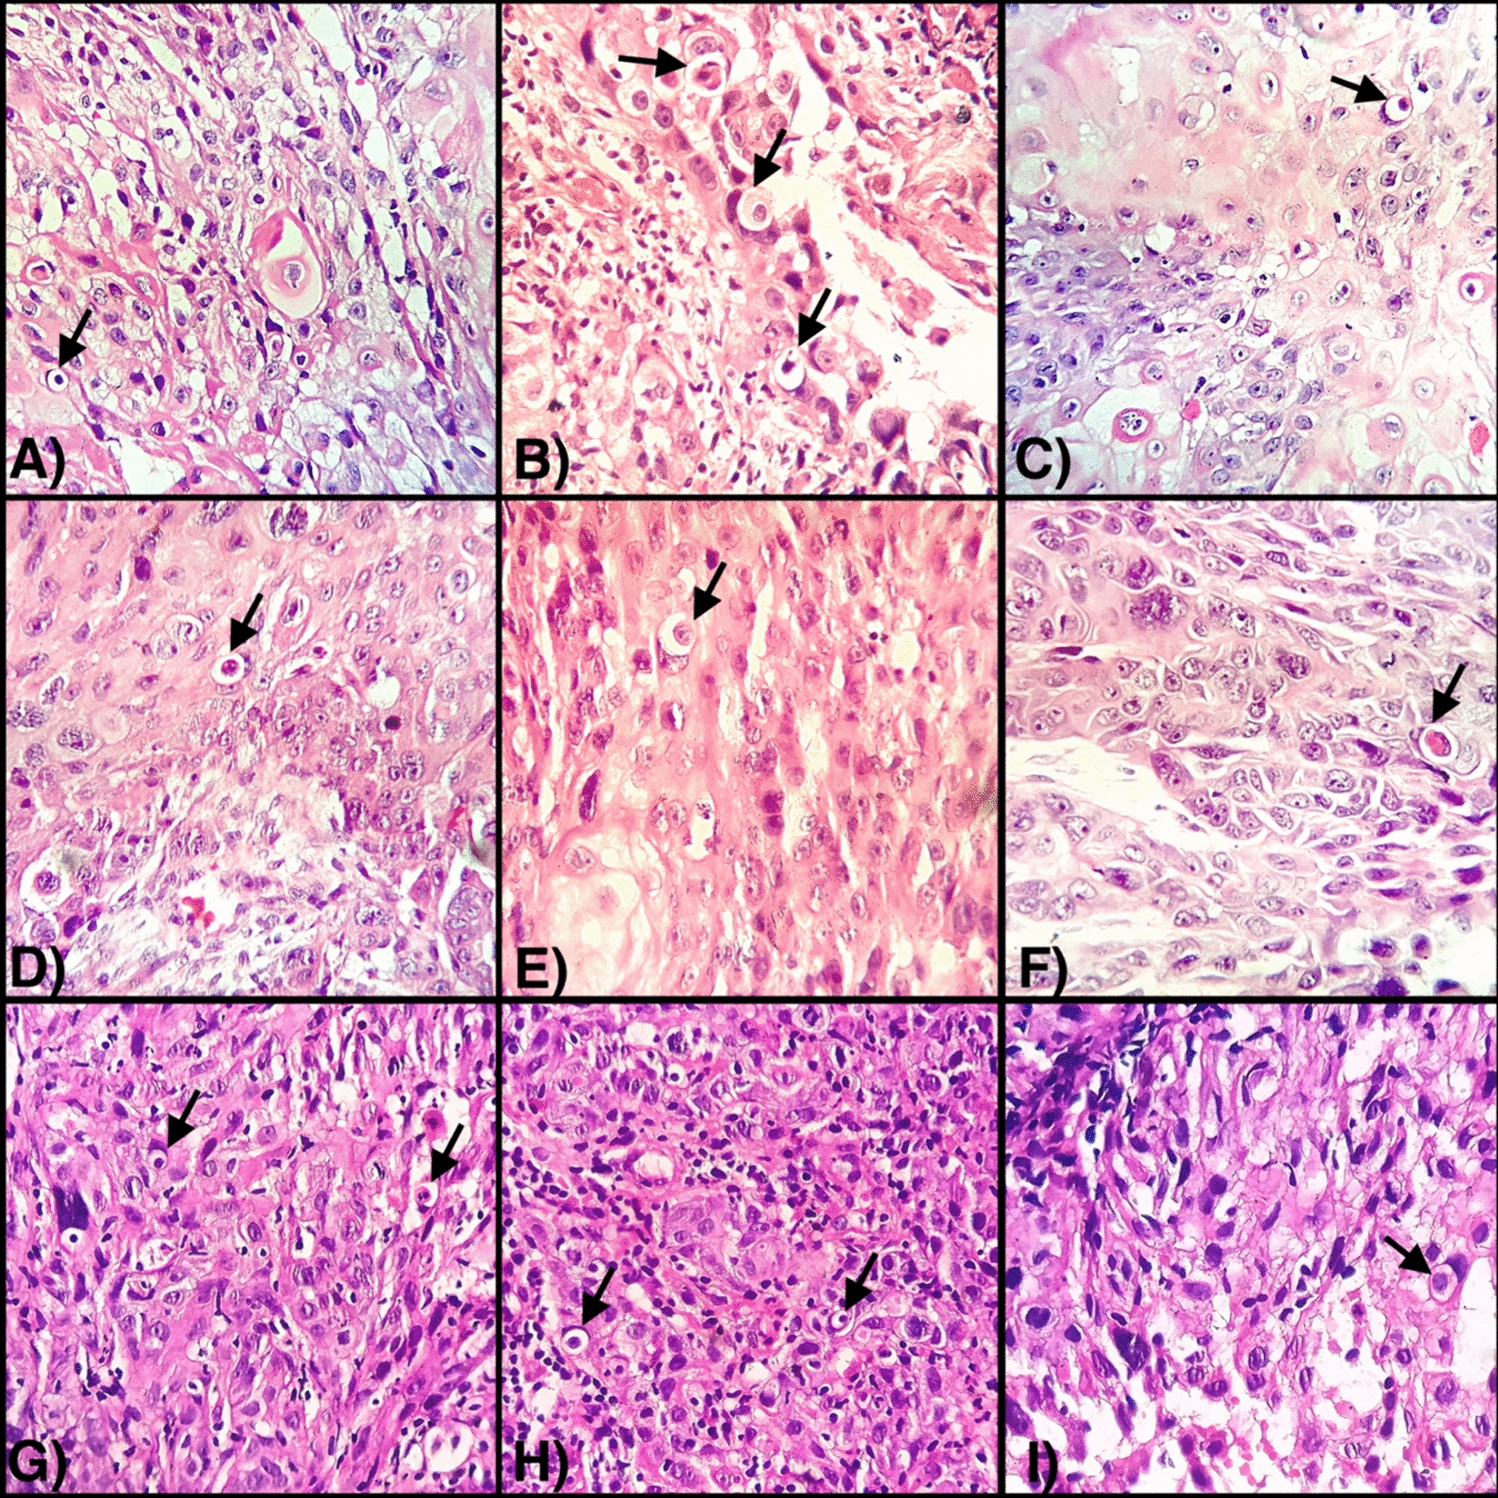 Association of Cellular Cannibalism with Immunohistochemical Expression of CD31, CD68 and BCL2 in Oral Squamous Cell Carcinoma: An Observational Study